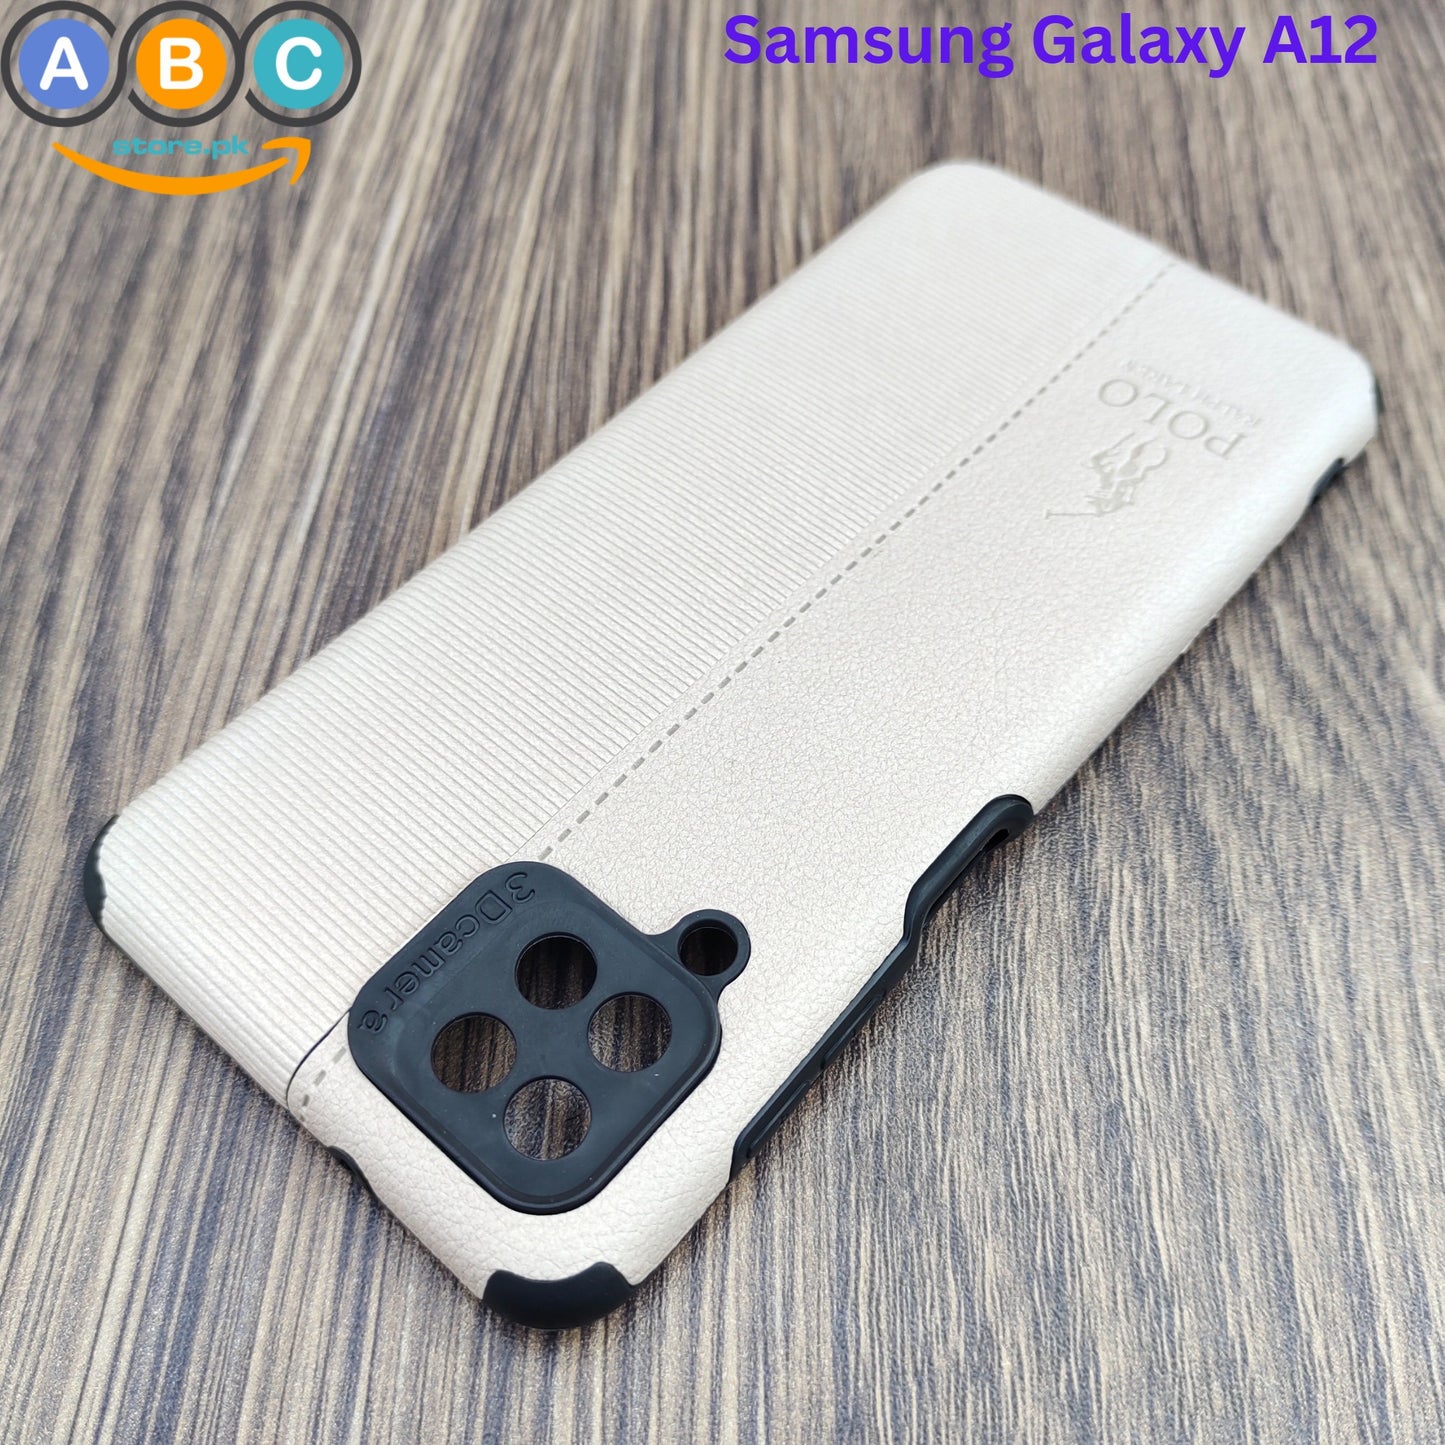 Samsung Galaxy A12 Case, Polo Dual Pattern Leather Finish Back Cover